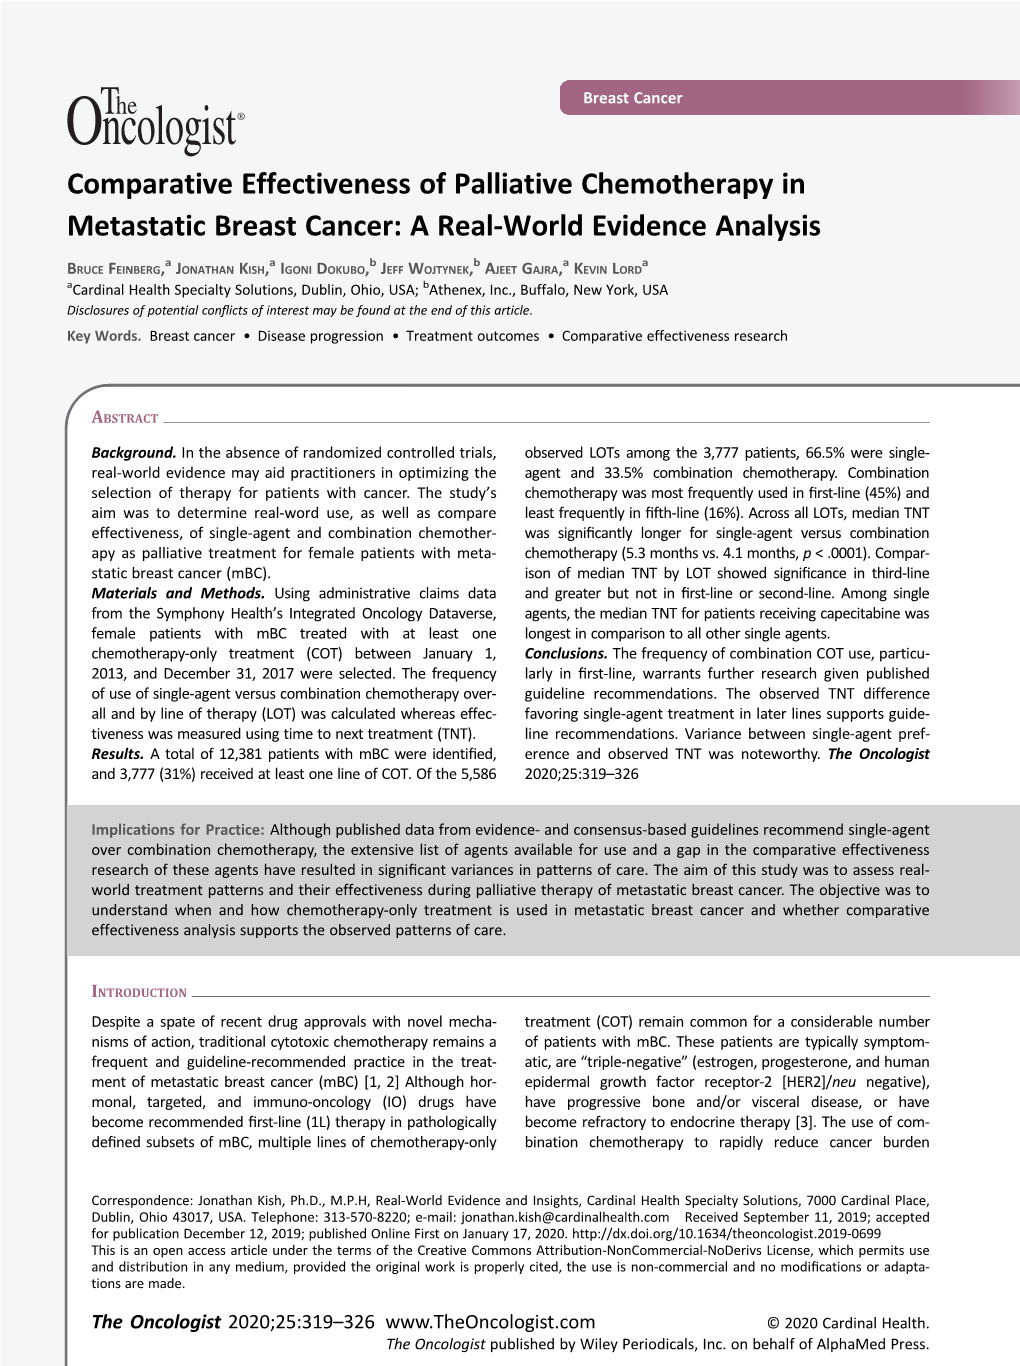 Comparative Effectiveness of Palliative Chemotherapy in Metastatic Breast Cancer: a Real-World Evidence Analysis